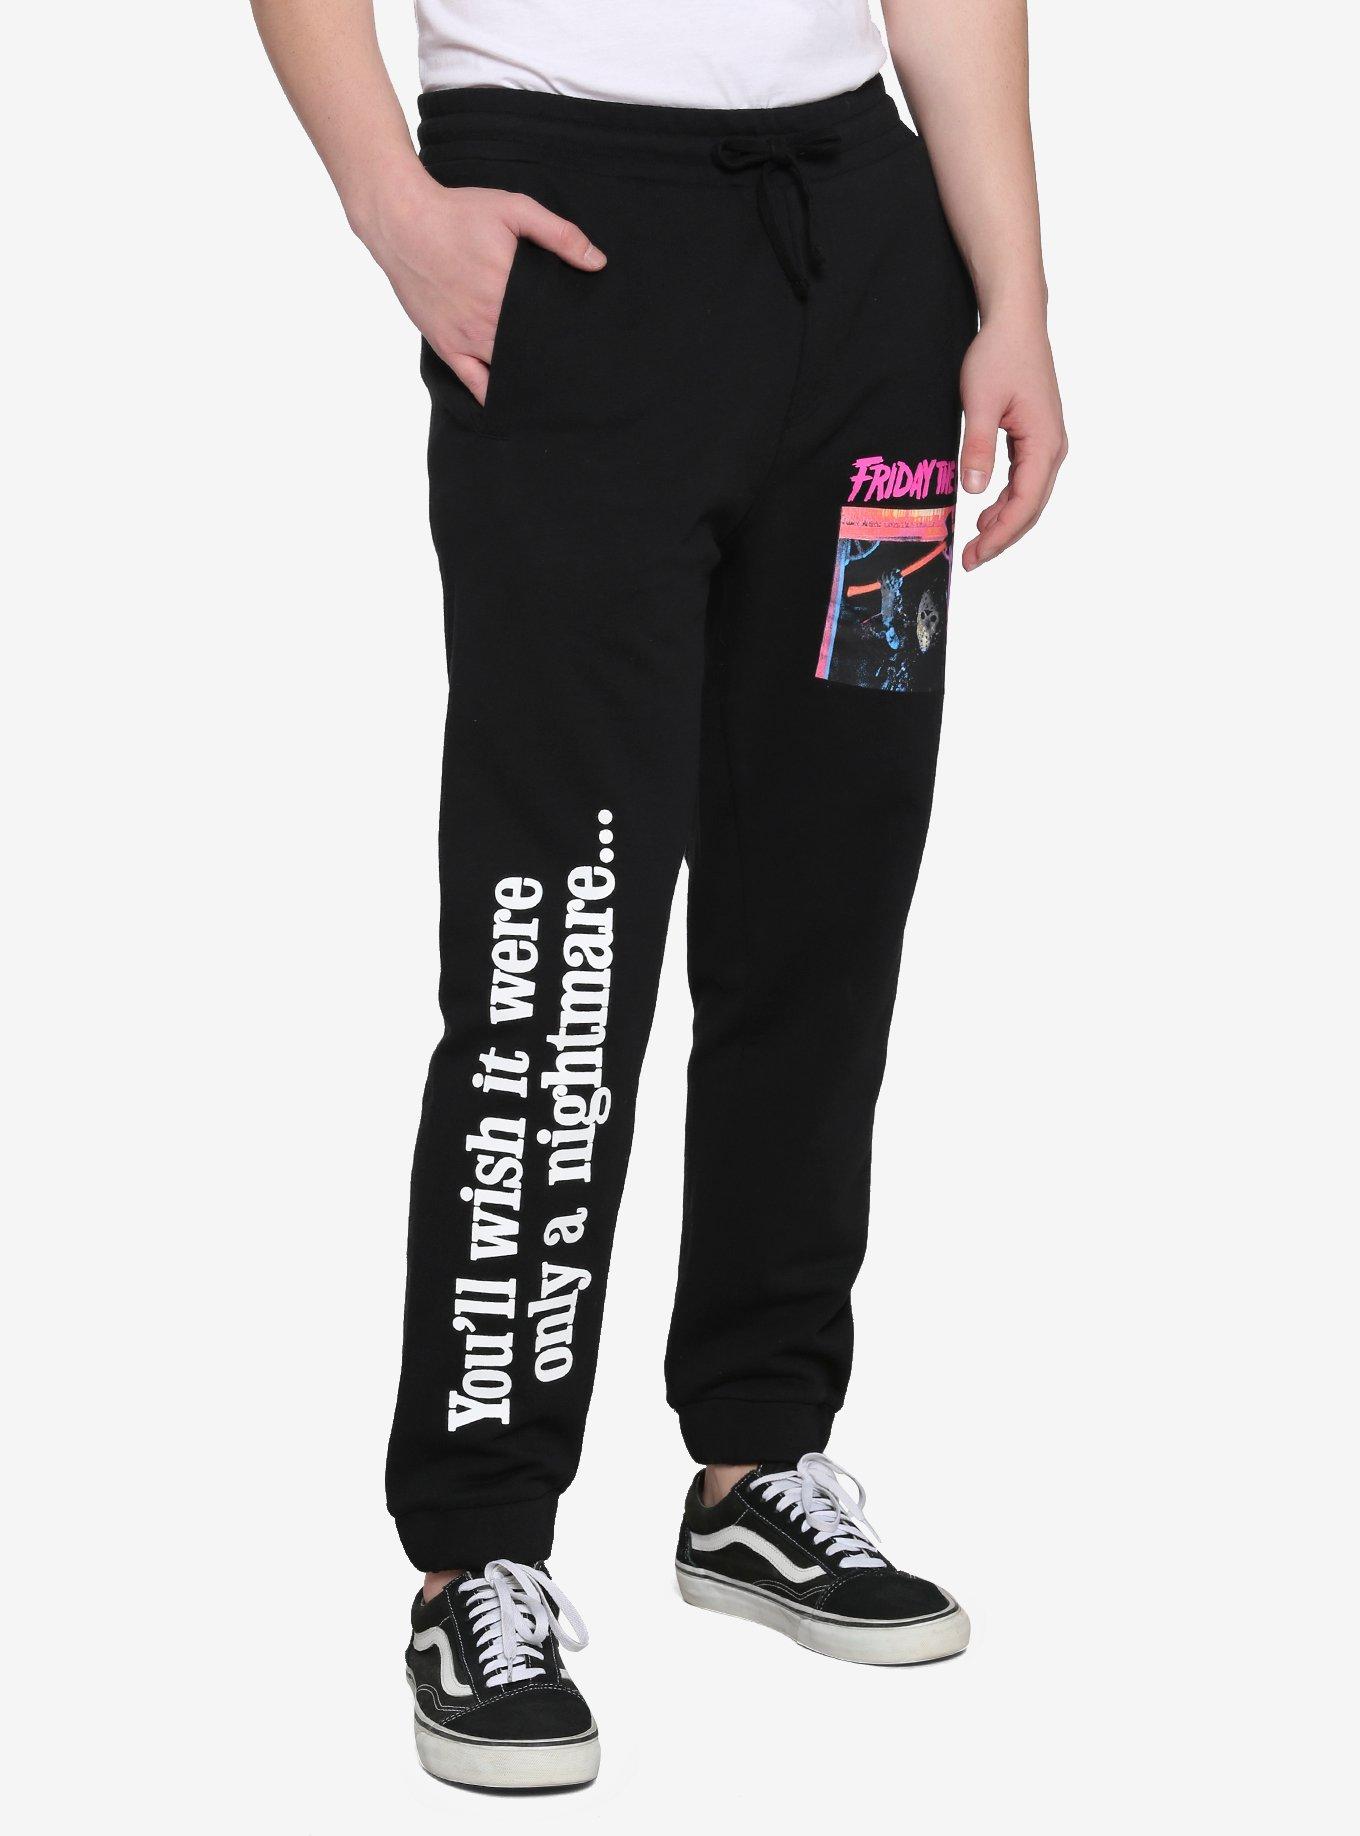 Friday The 13th You'll Wish It Were Only A Nightmare Sweatpants, MULTI, alternate